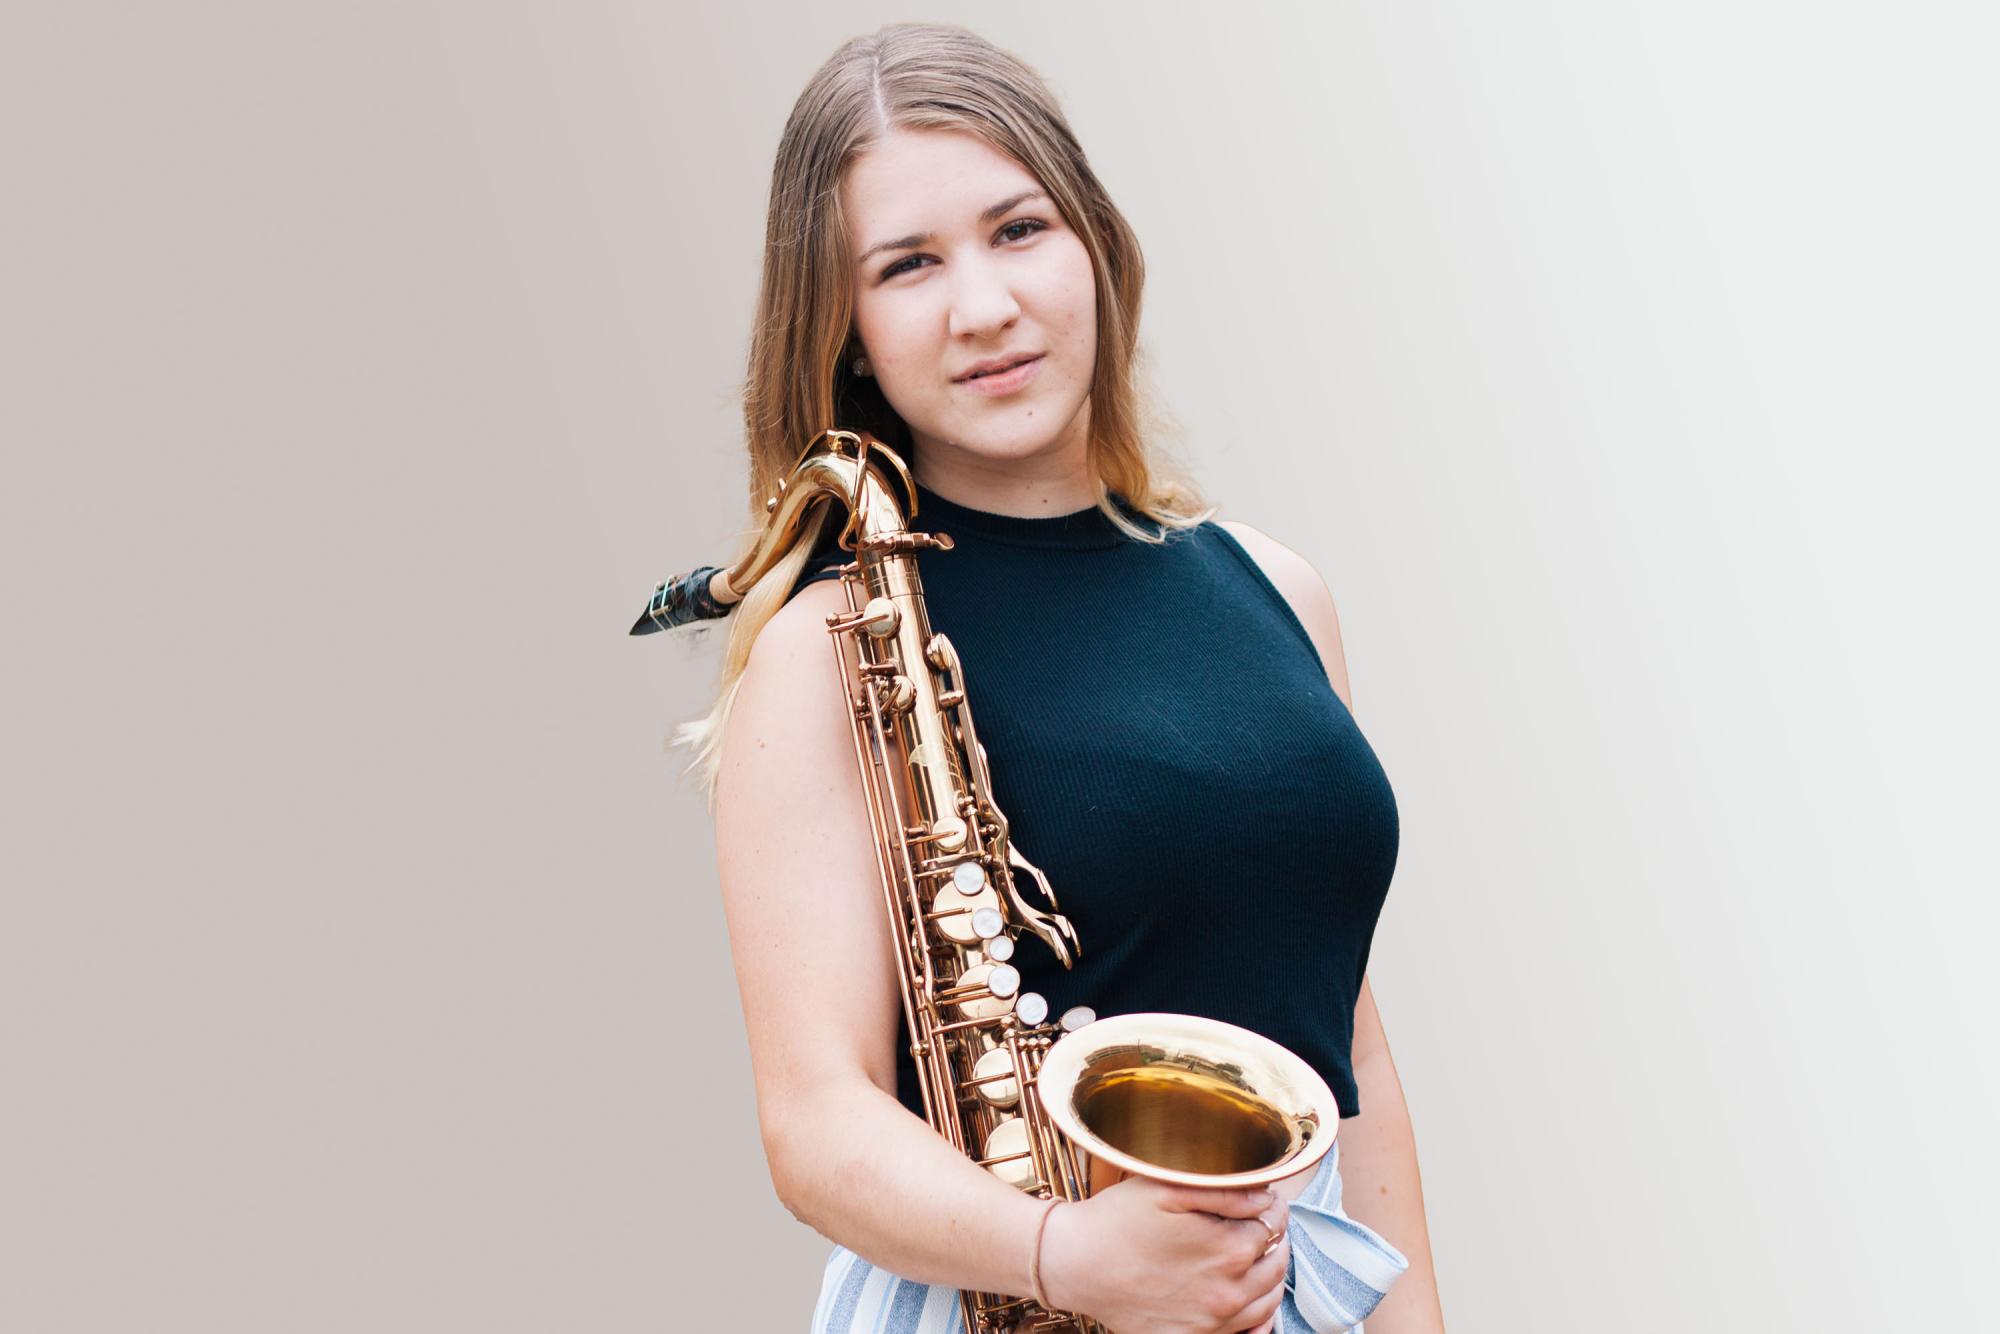 A Saxophone Student with her instrument looks into camera